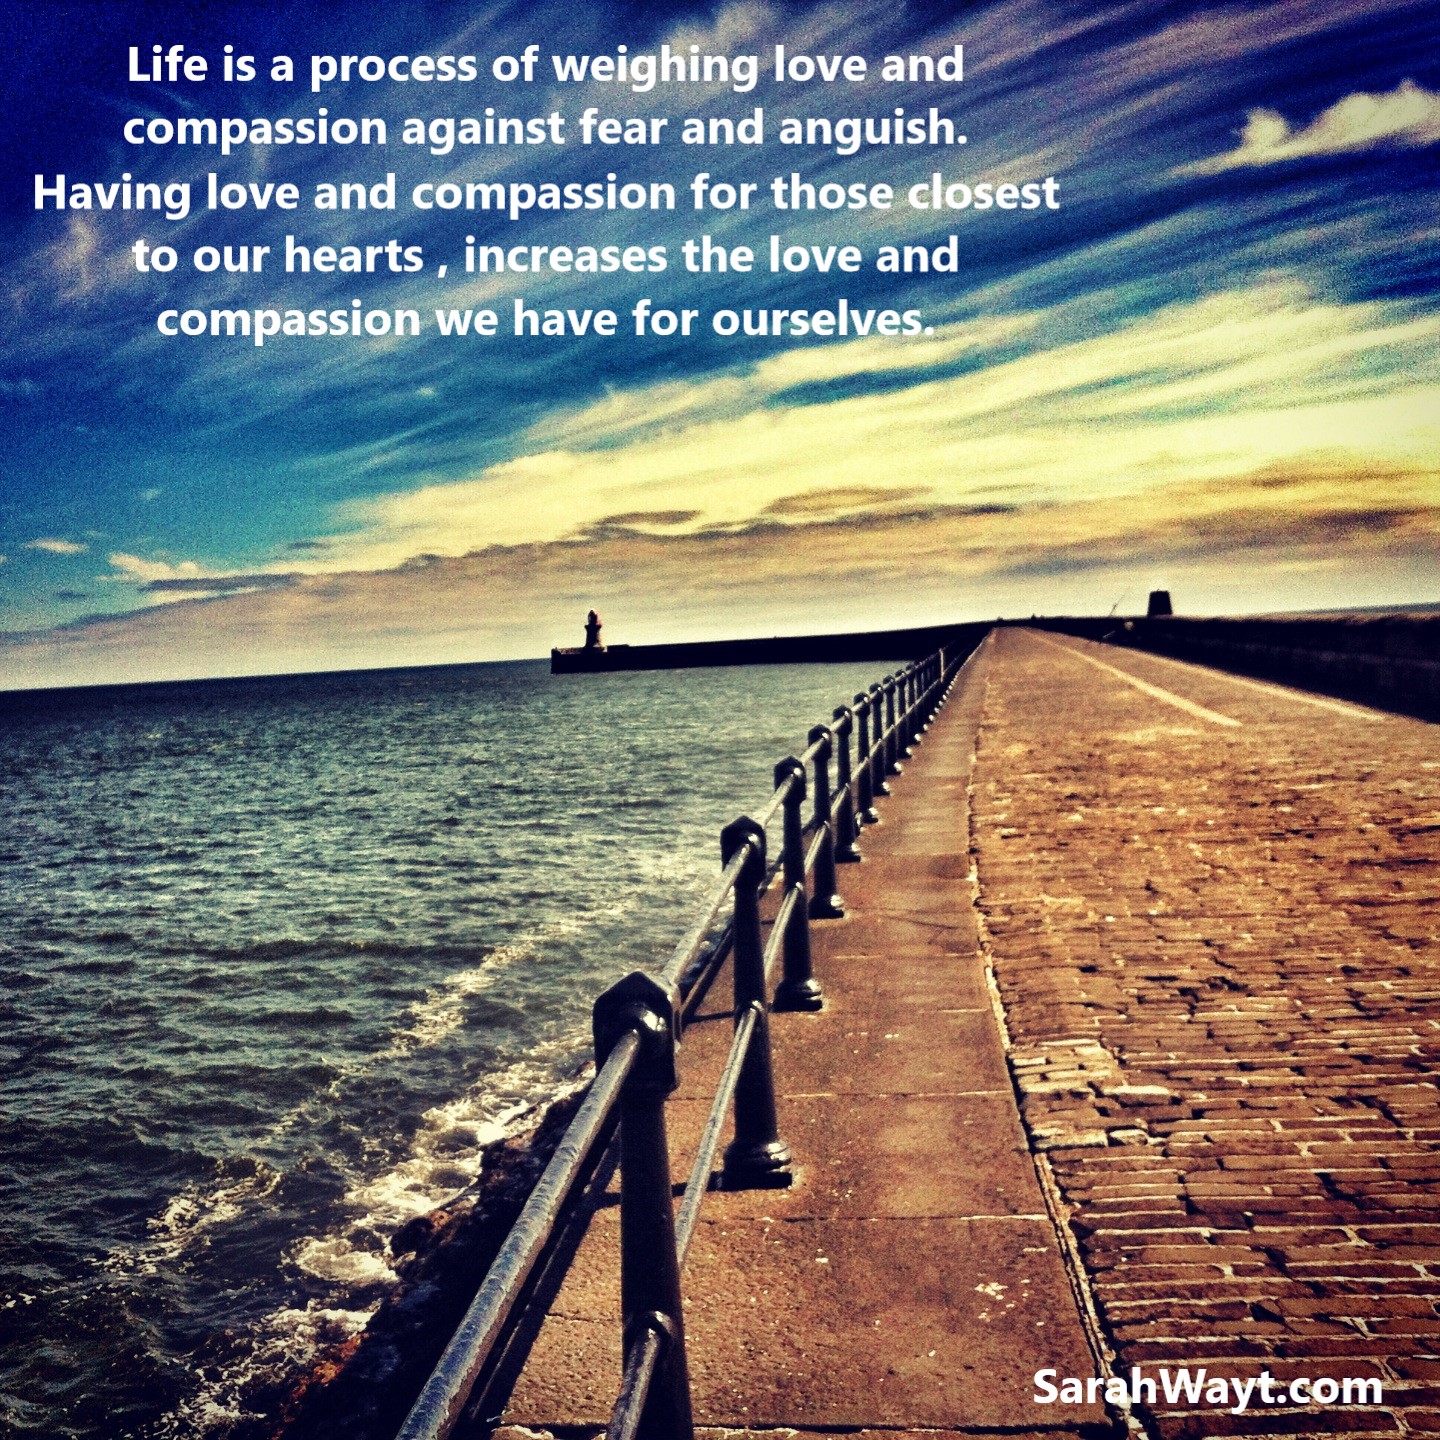 life is a process of weighing love and compassion against fear and anguish